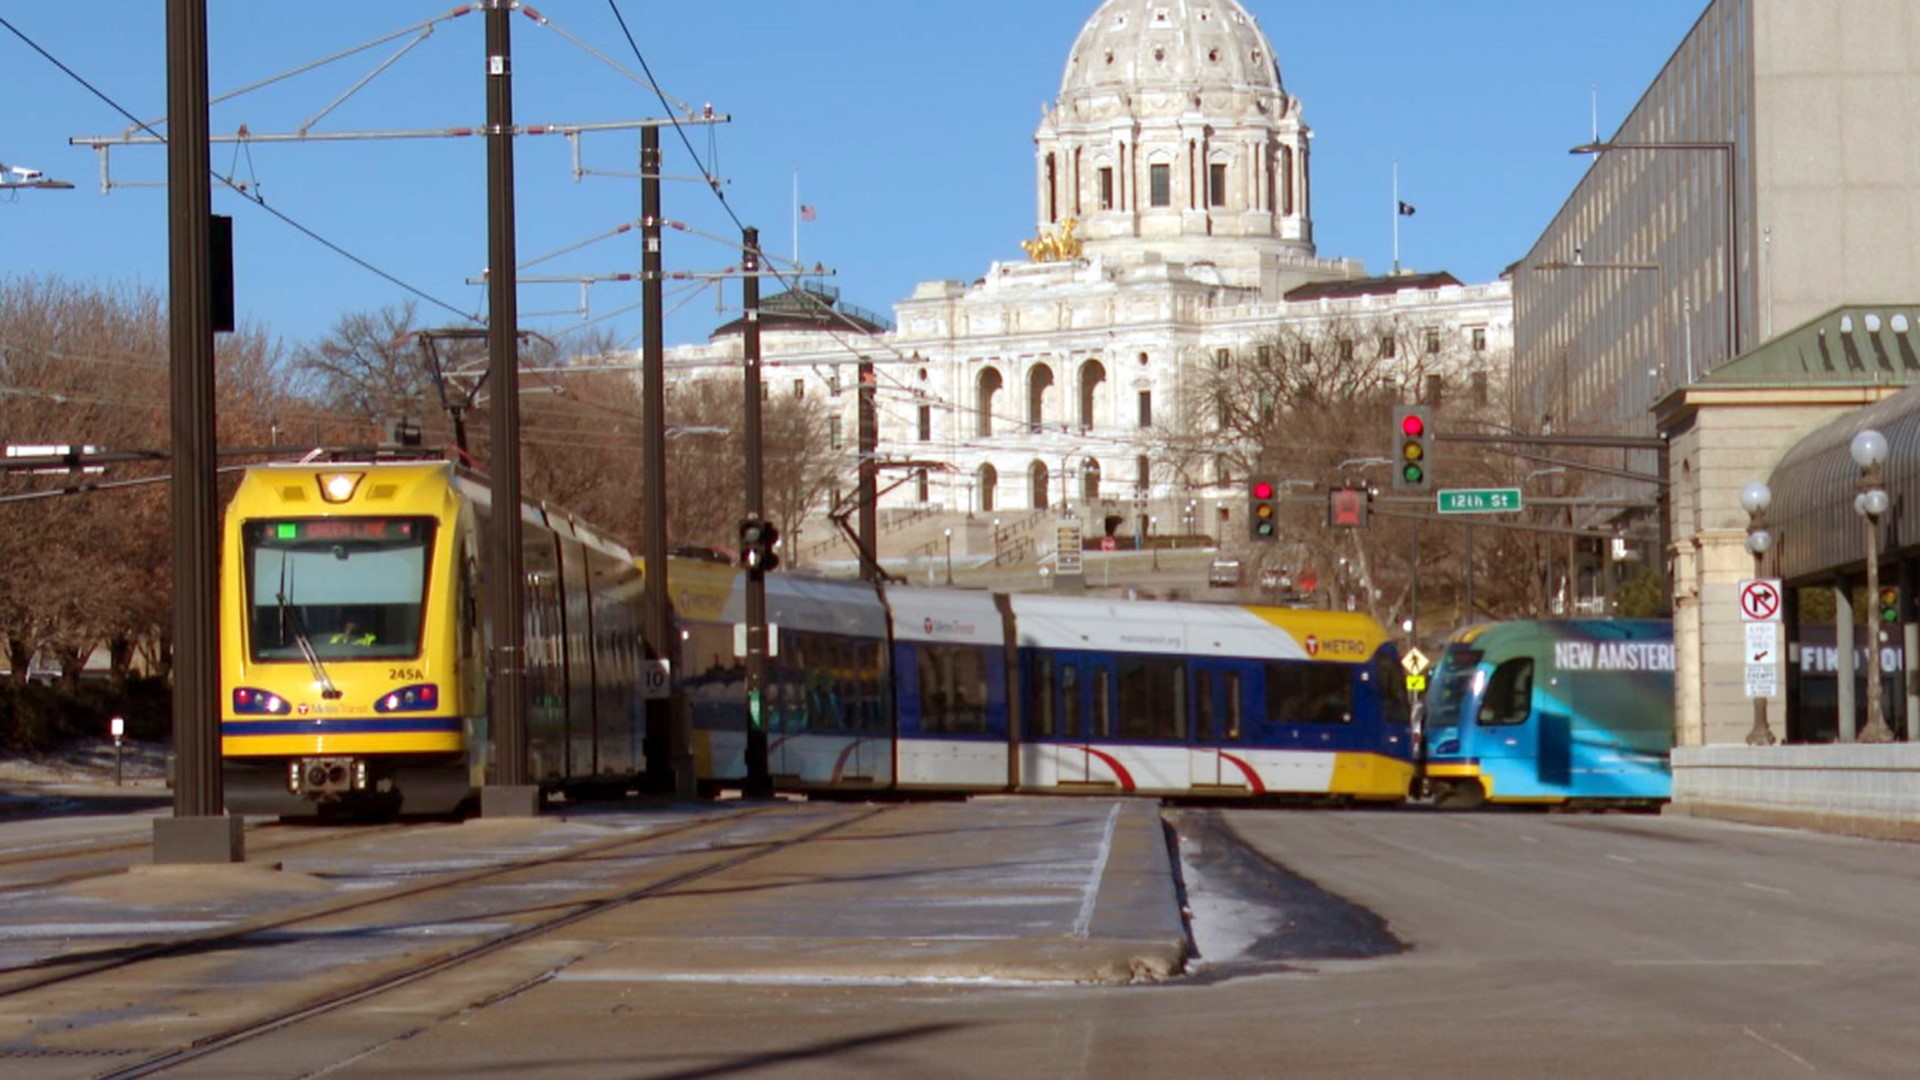 Metro Transit rolls out new code of conduct and Transit Rider Investment Program as part of multi-faceted safety upgrades on light rail system.